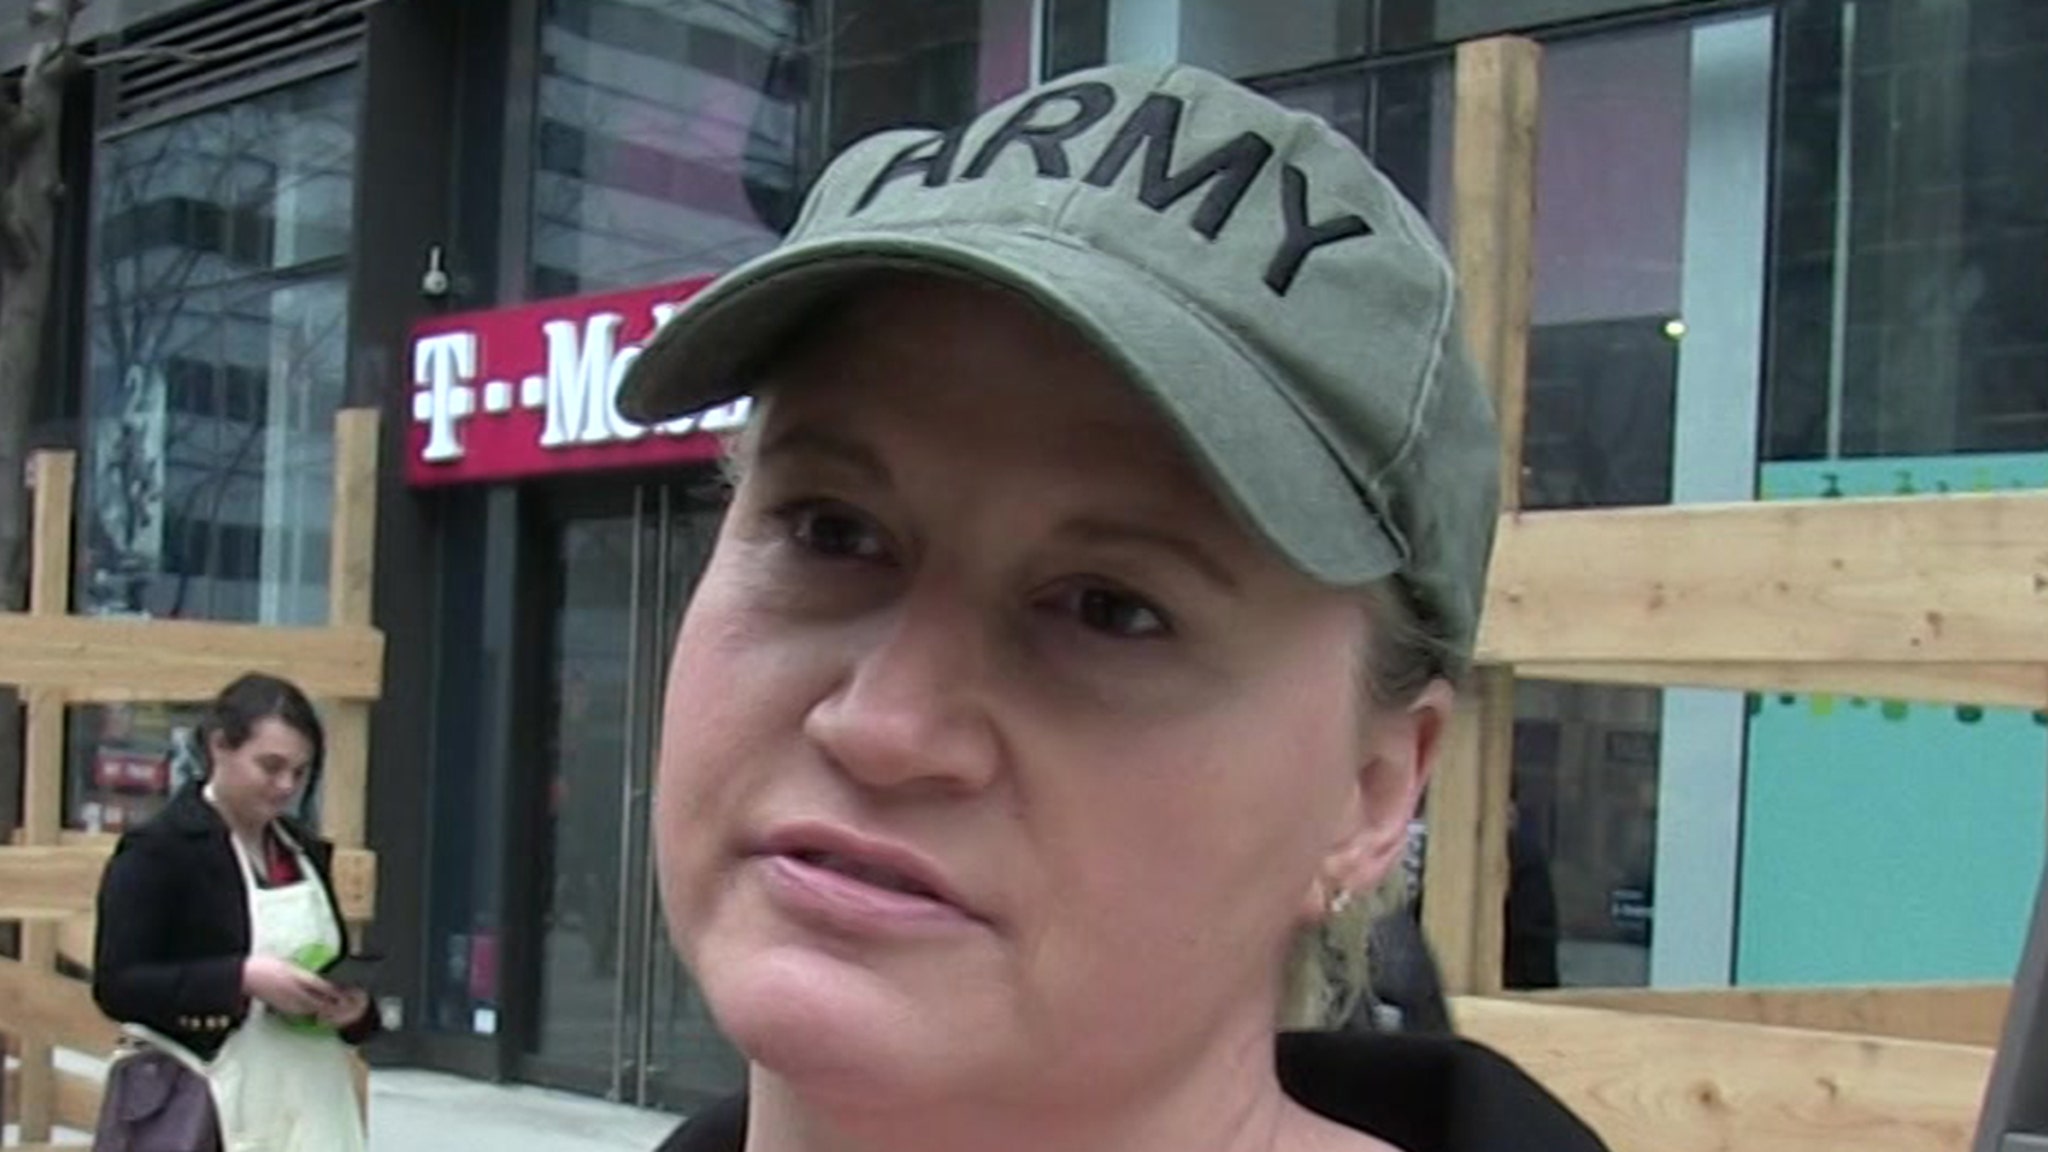 WWE Legend Tammy Sytch Arrested For Weapons Possession, Terroristic Threats - TMZ